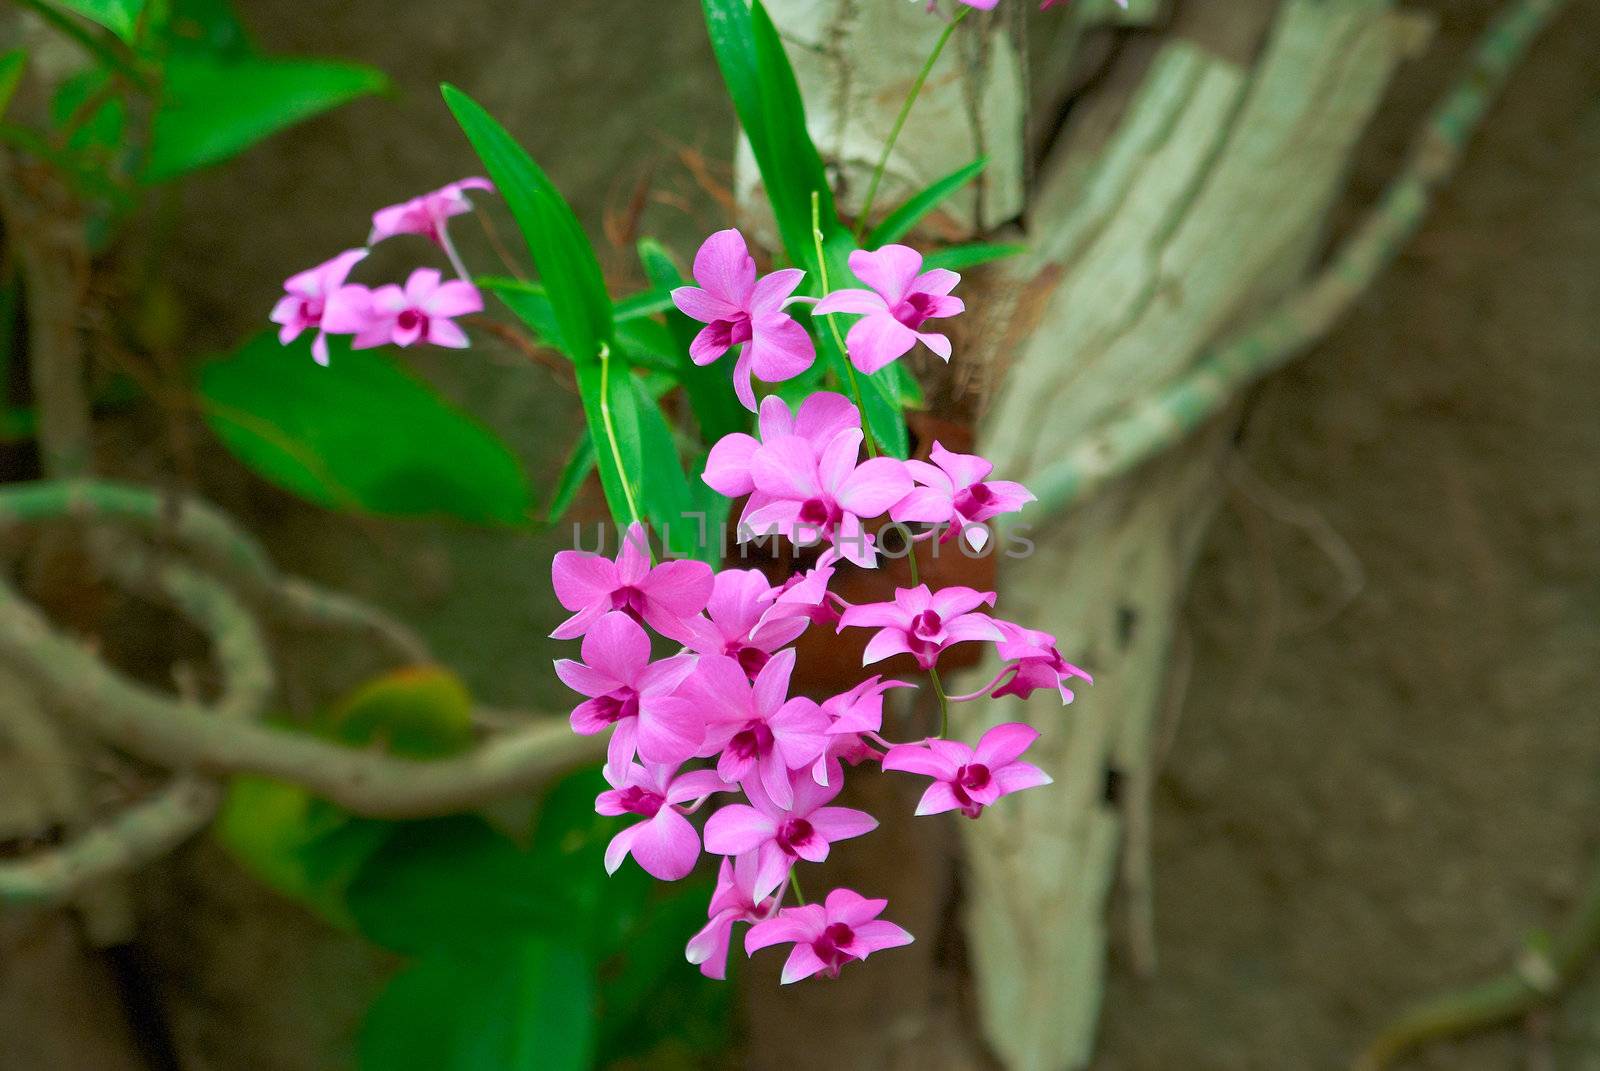 Orchid is tender violet against the background green leaves and the tree